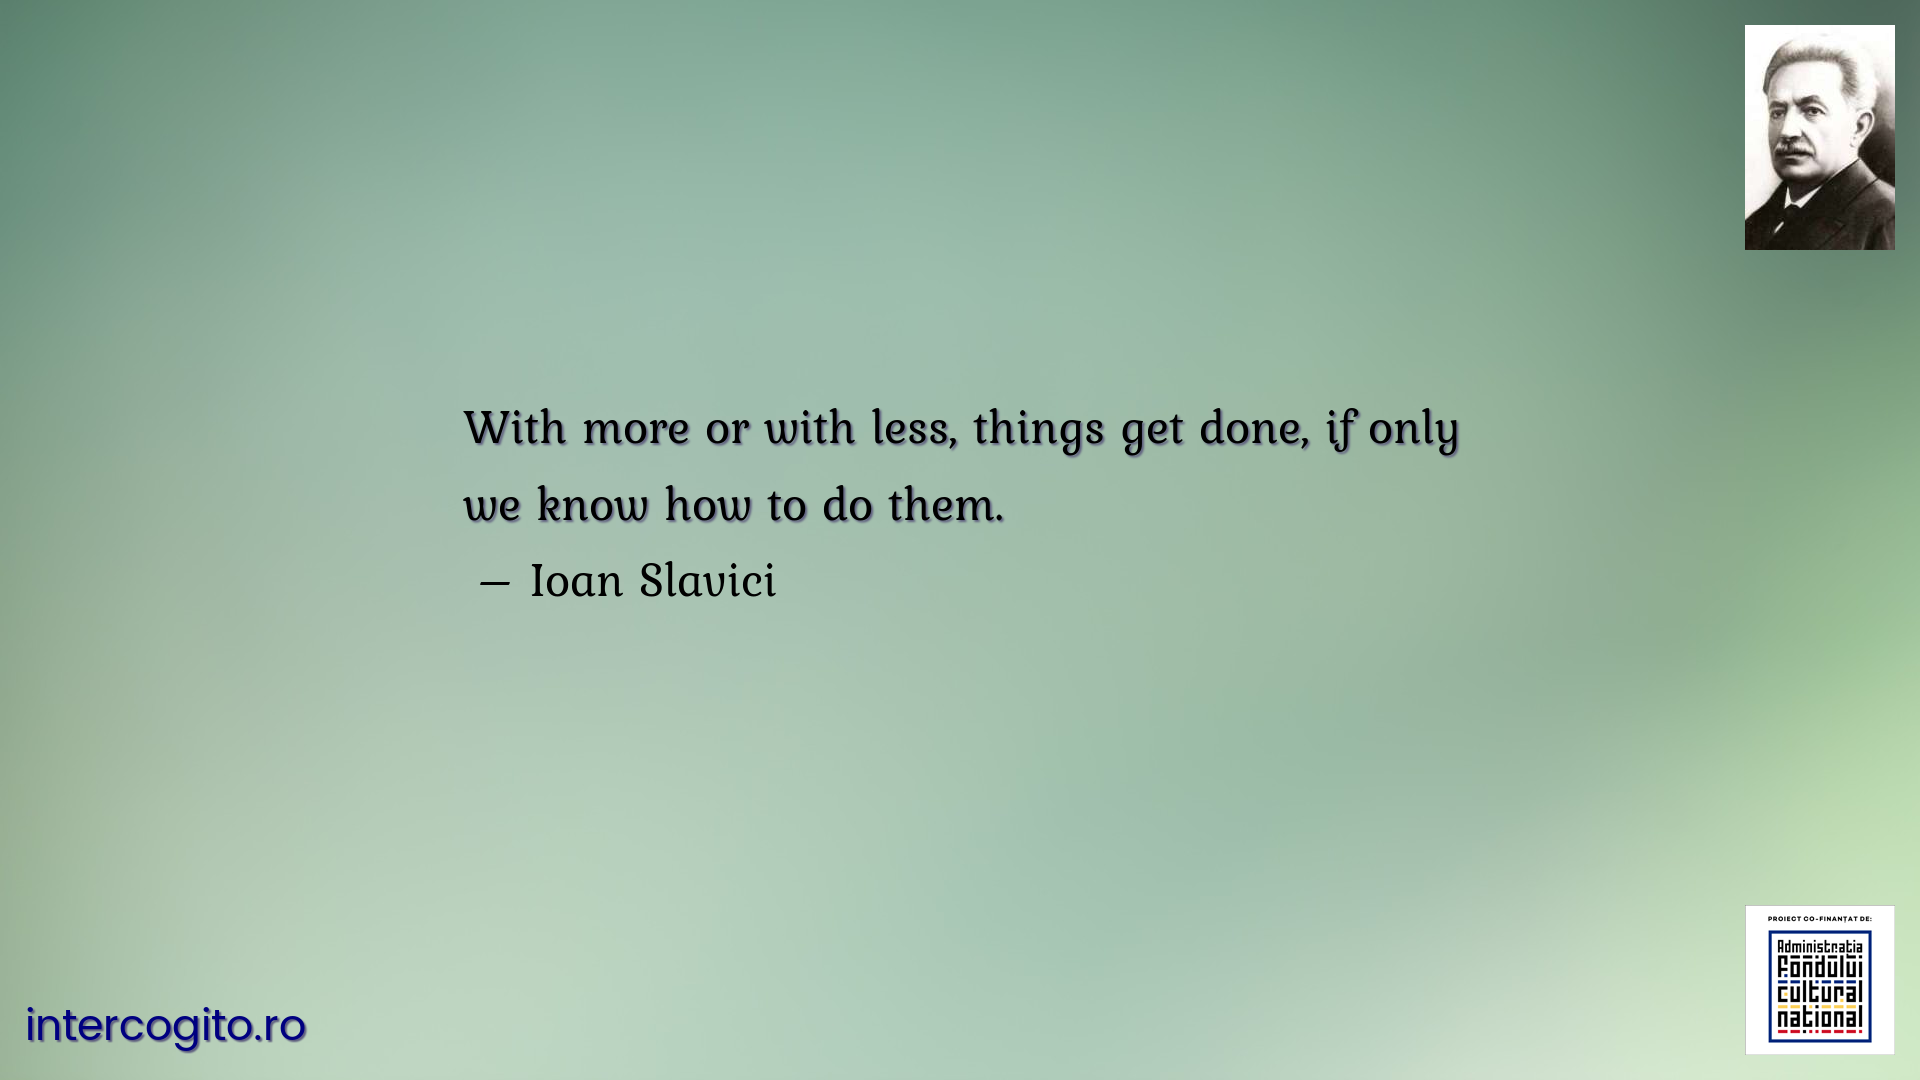 With more or with less, things get done, if only we know how to do them.